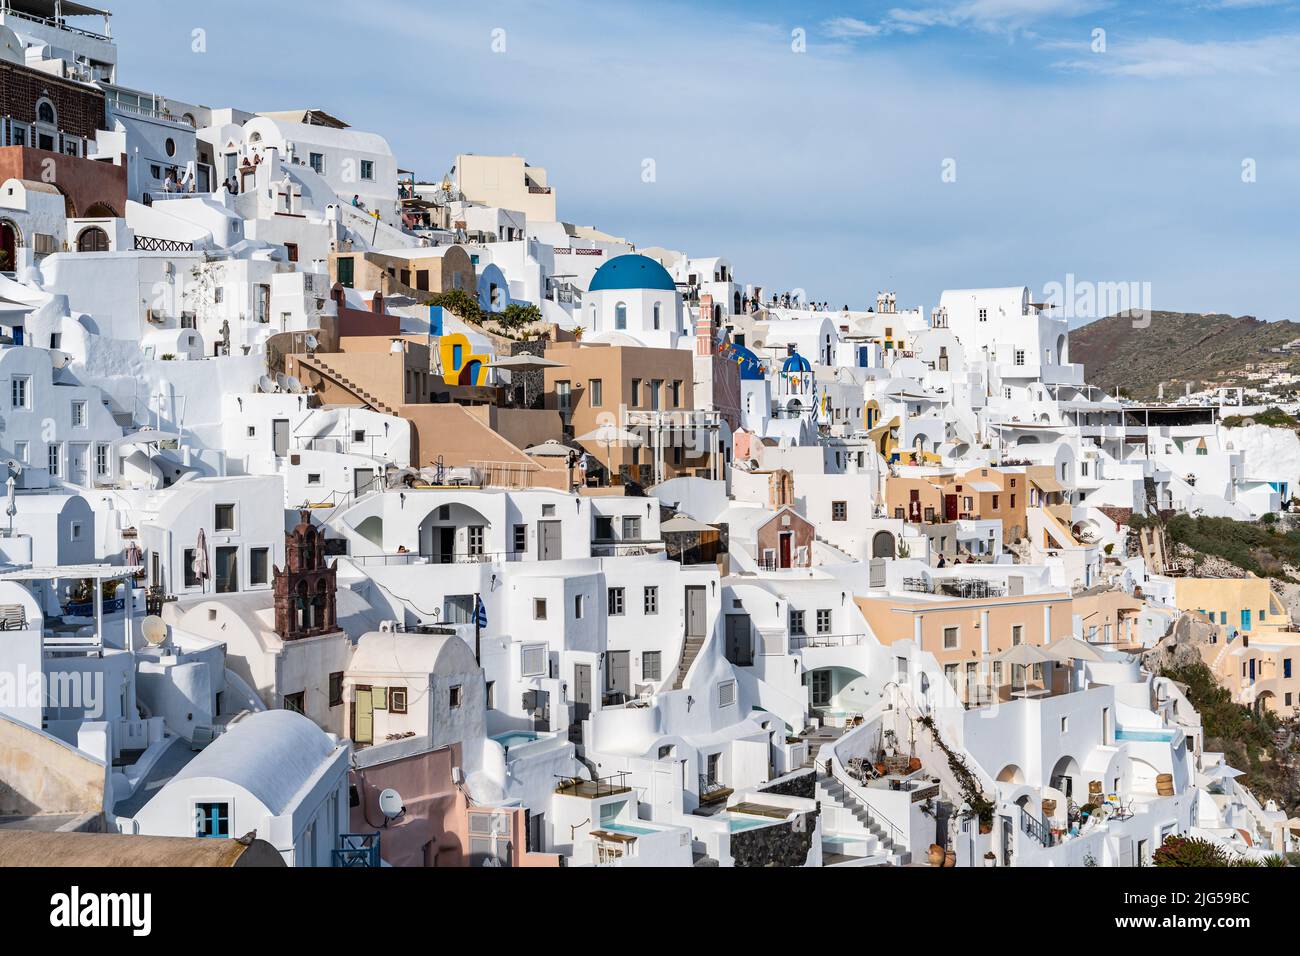 Scenic view of Oia town in Santorini with whitewashed houses and a small church with blue domes, Greece Stock Photo